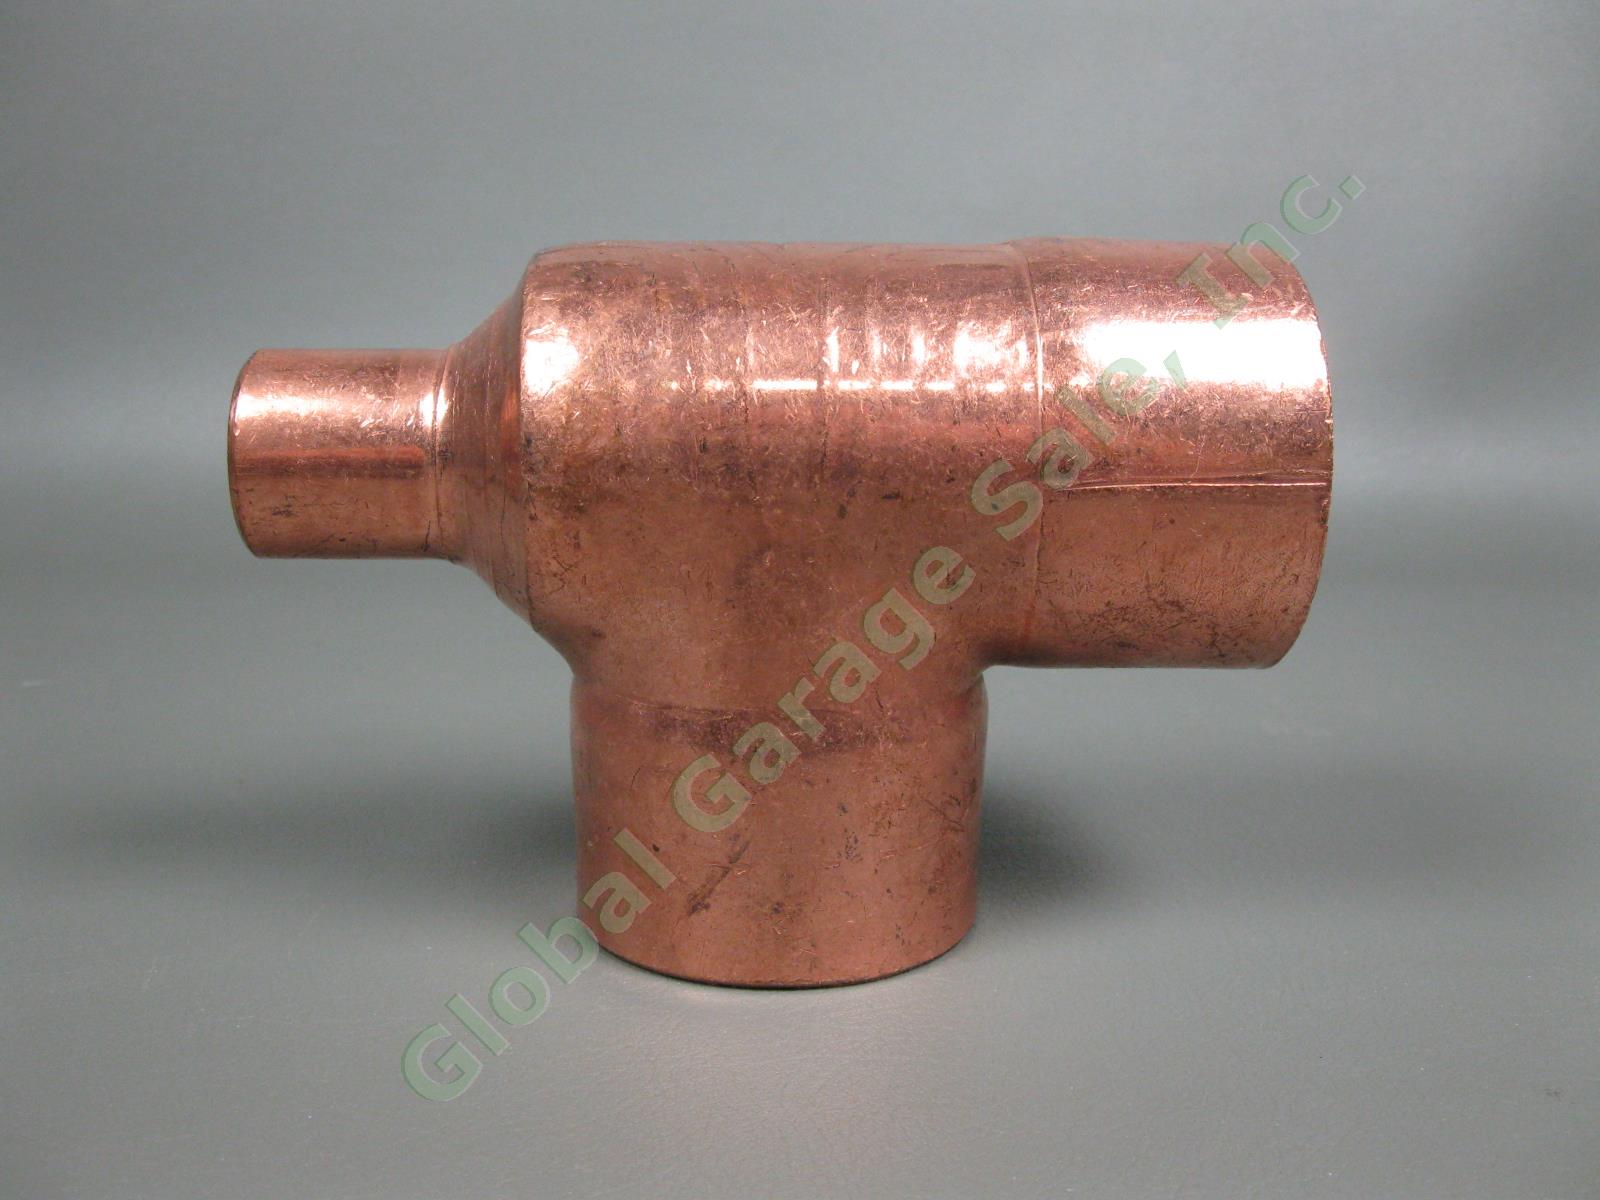 NEW 1" x 2" x 2" Copper EPC Reducing Sweat Tee Pipe Fitting Run Connection Eqpt 1